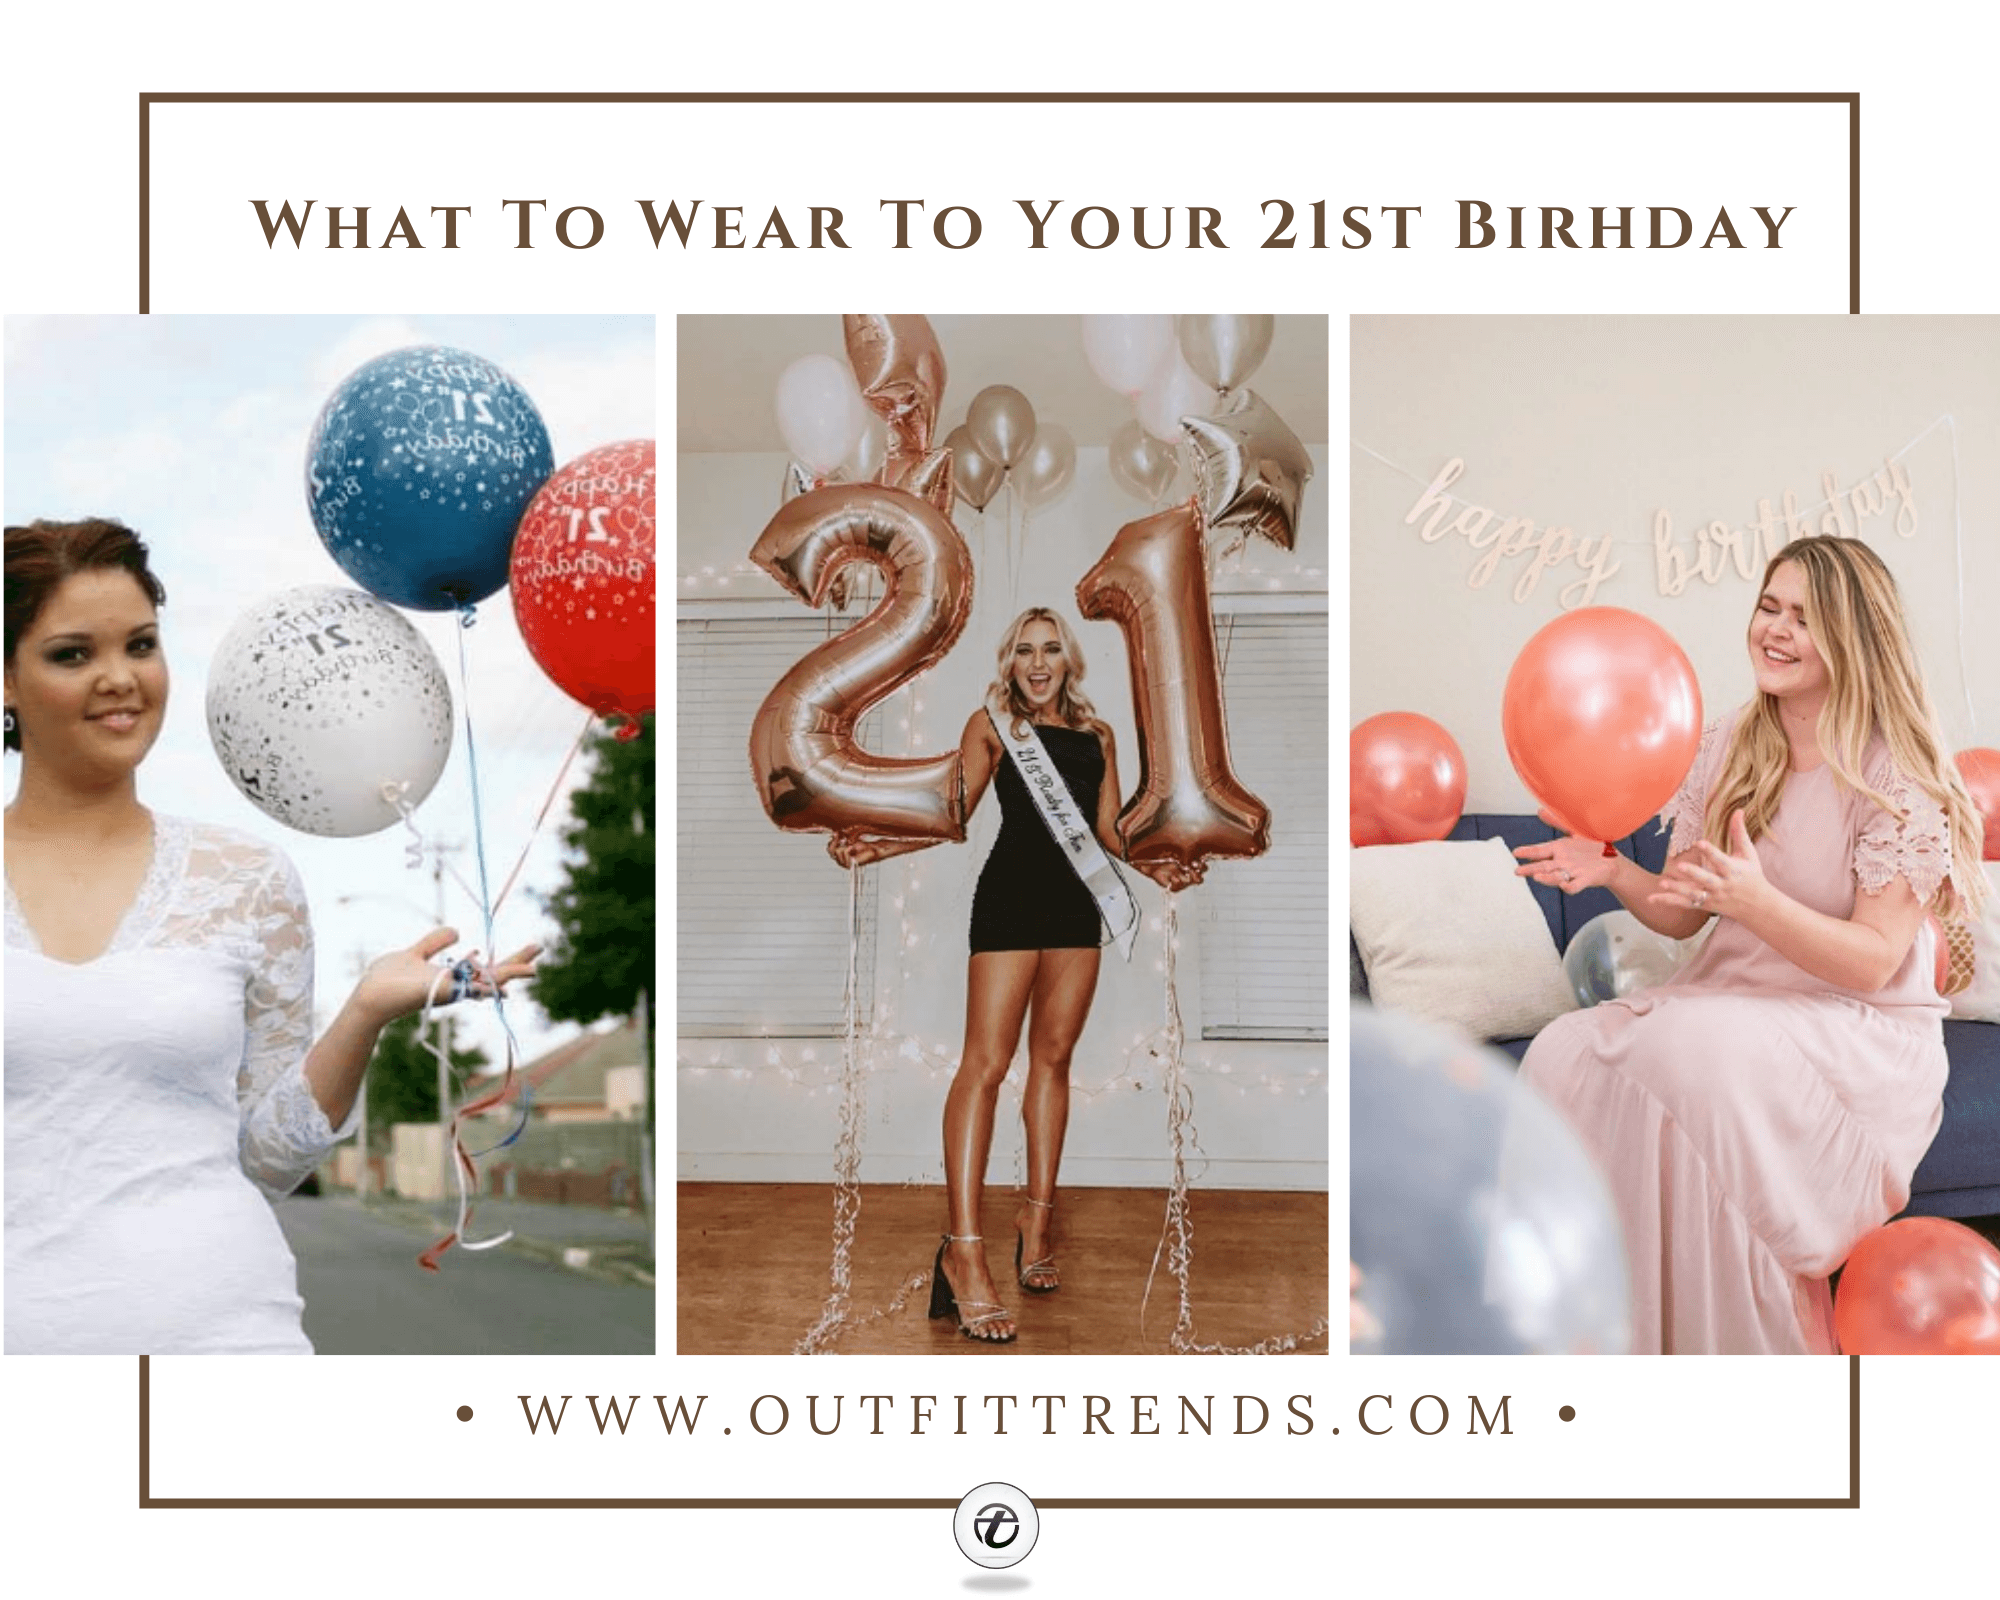 15 Cute 21st Birthday Outfit Ideas You Will Love